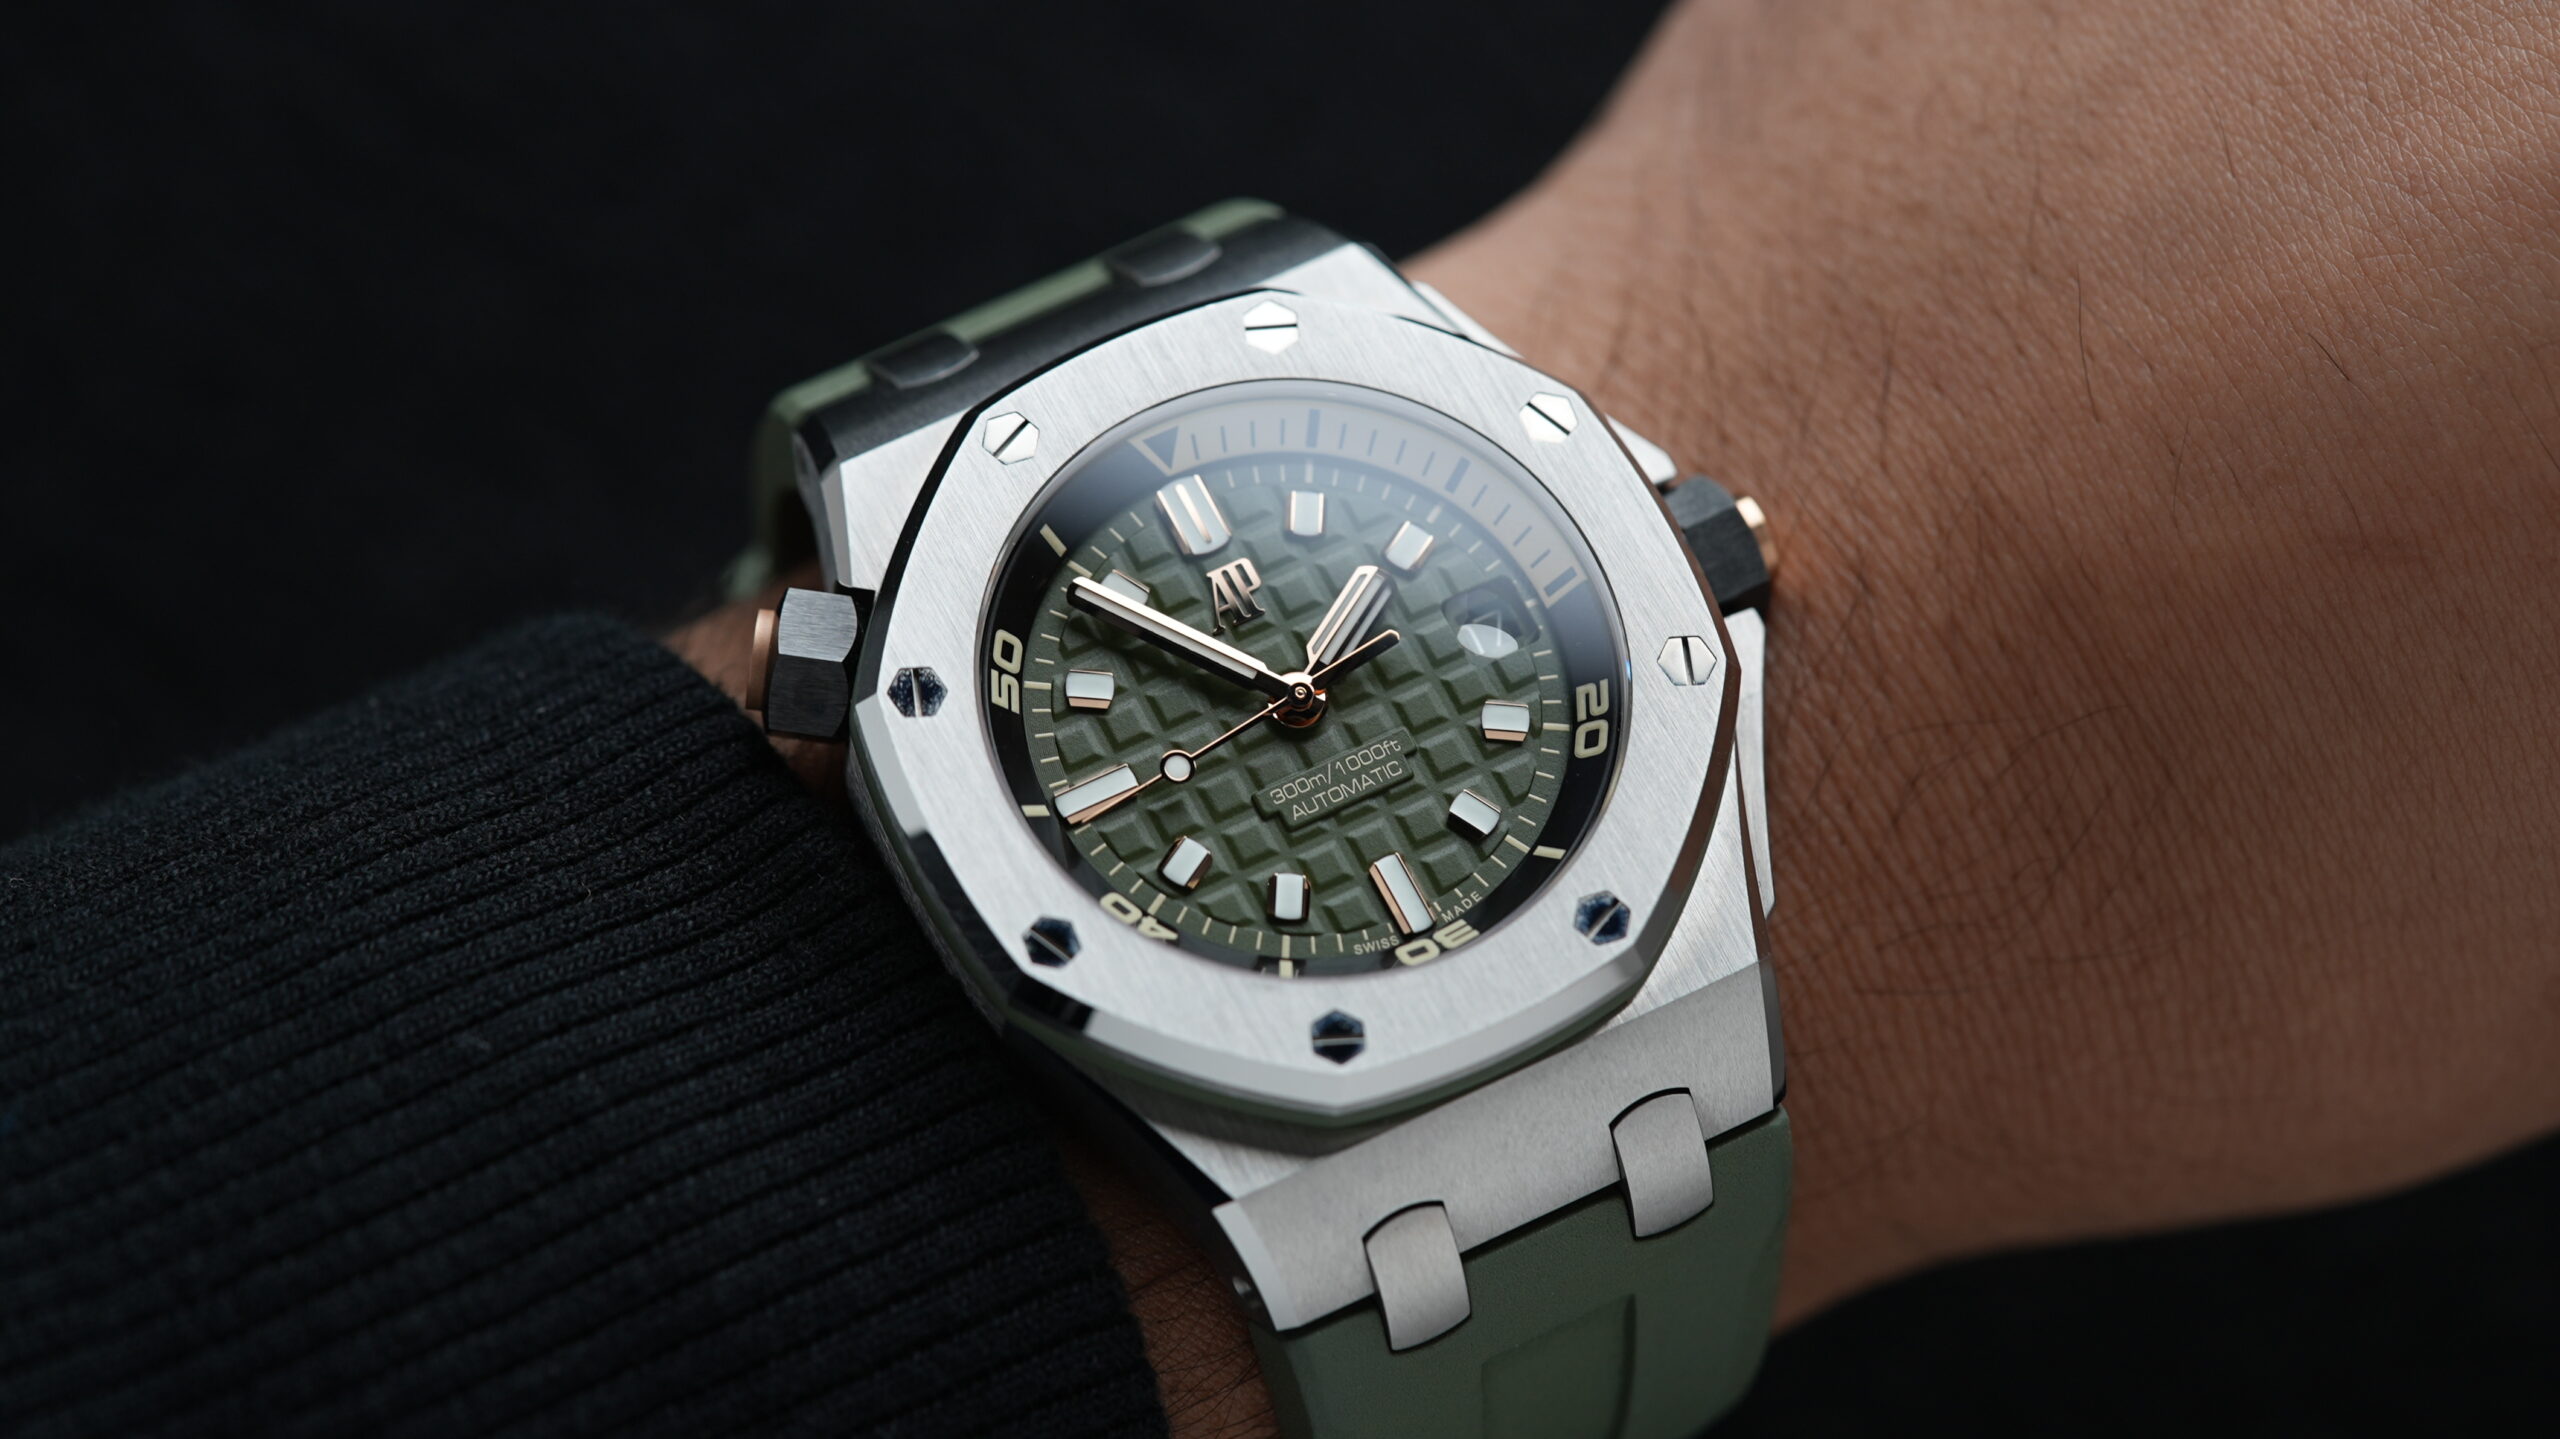 Audemars Piguet Royal Oak Offshore 42mm Diver 15720ST.OO.A052CA.01 | Ref.  15720ST.OO.A052CA.01 Watches on Chrono24